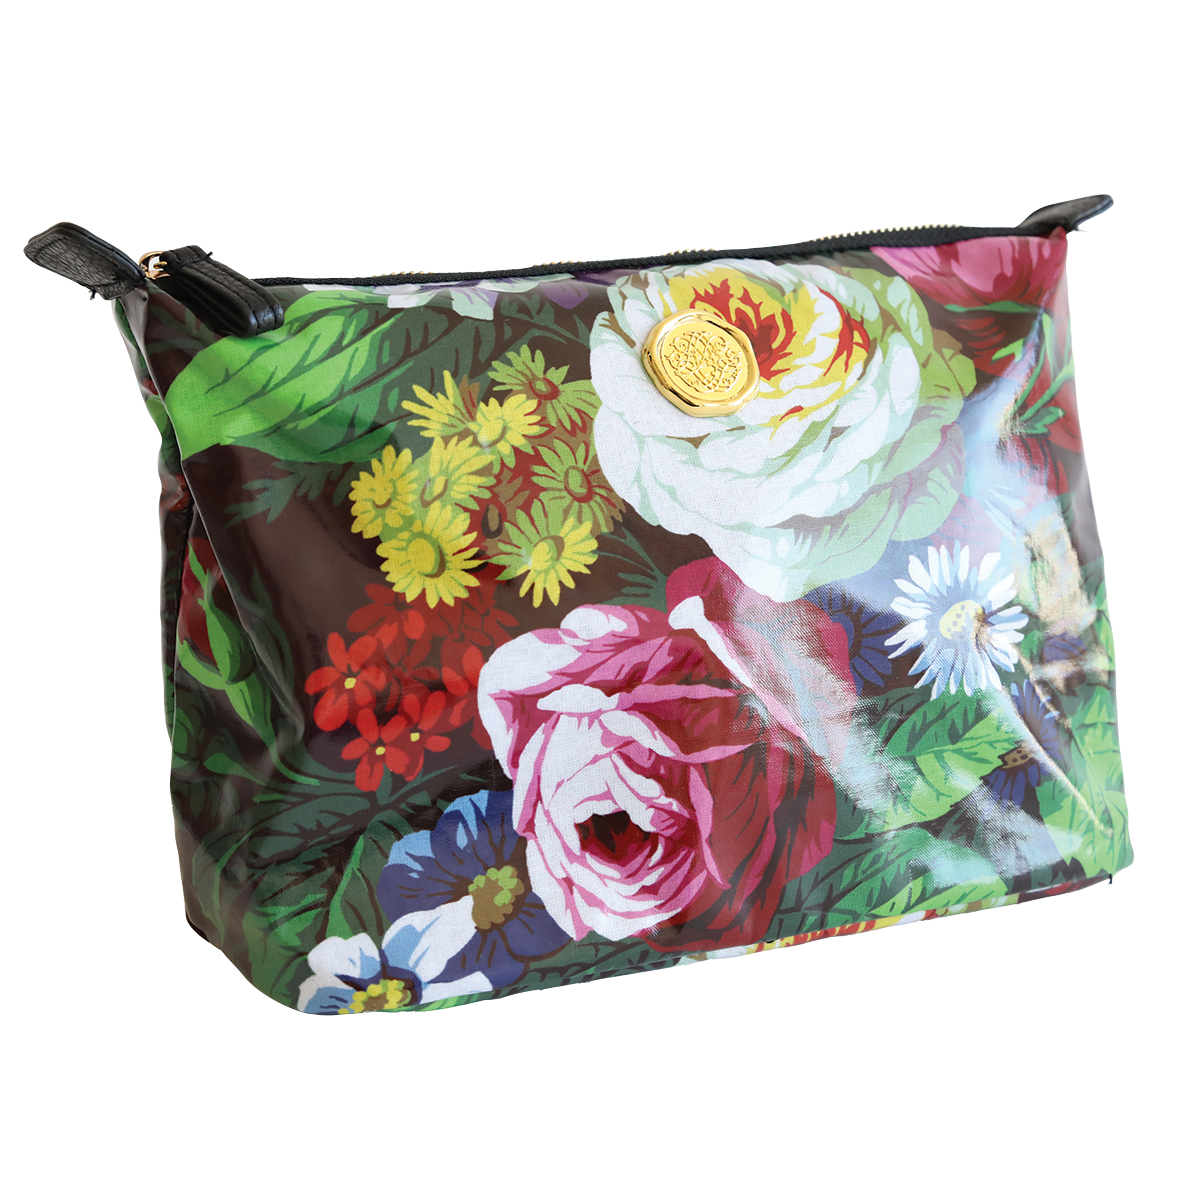 A large colorful floral Astrid cosmetic bag with a prominent white rose design, a gold zipper, and a nylon interior.